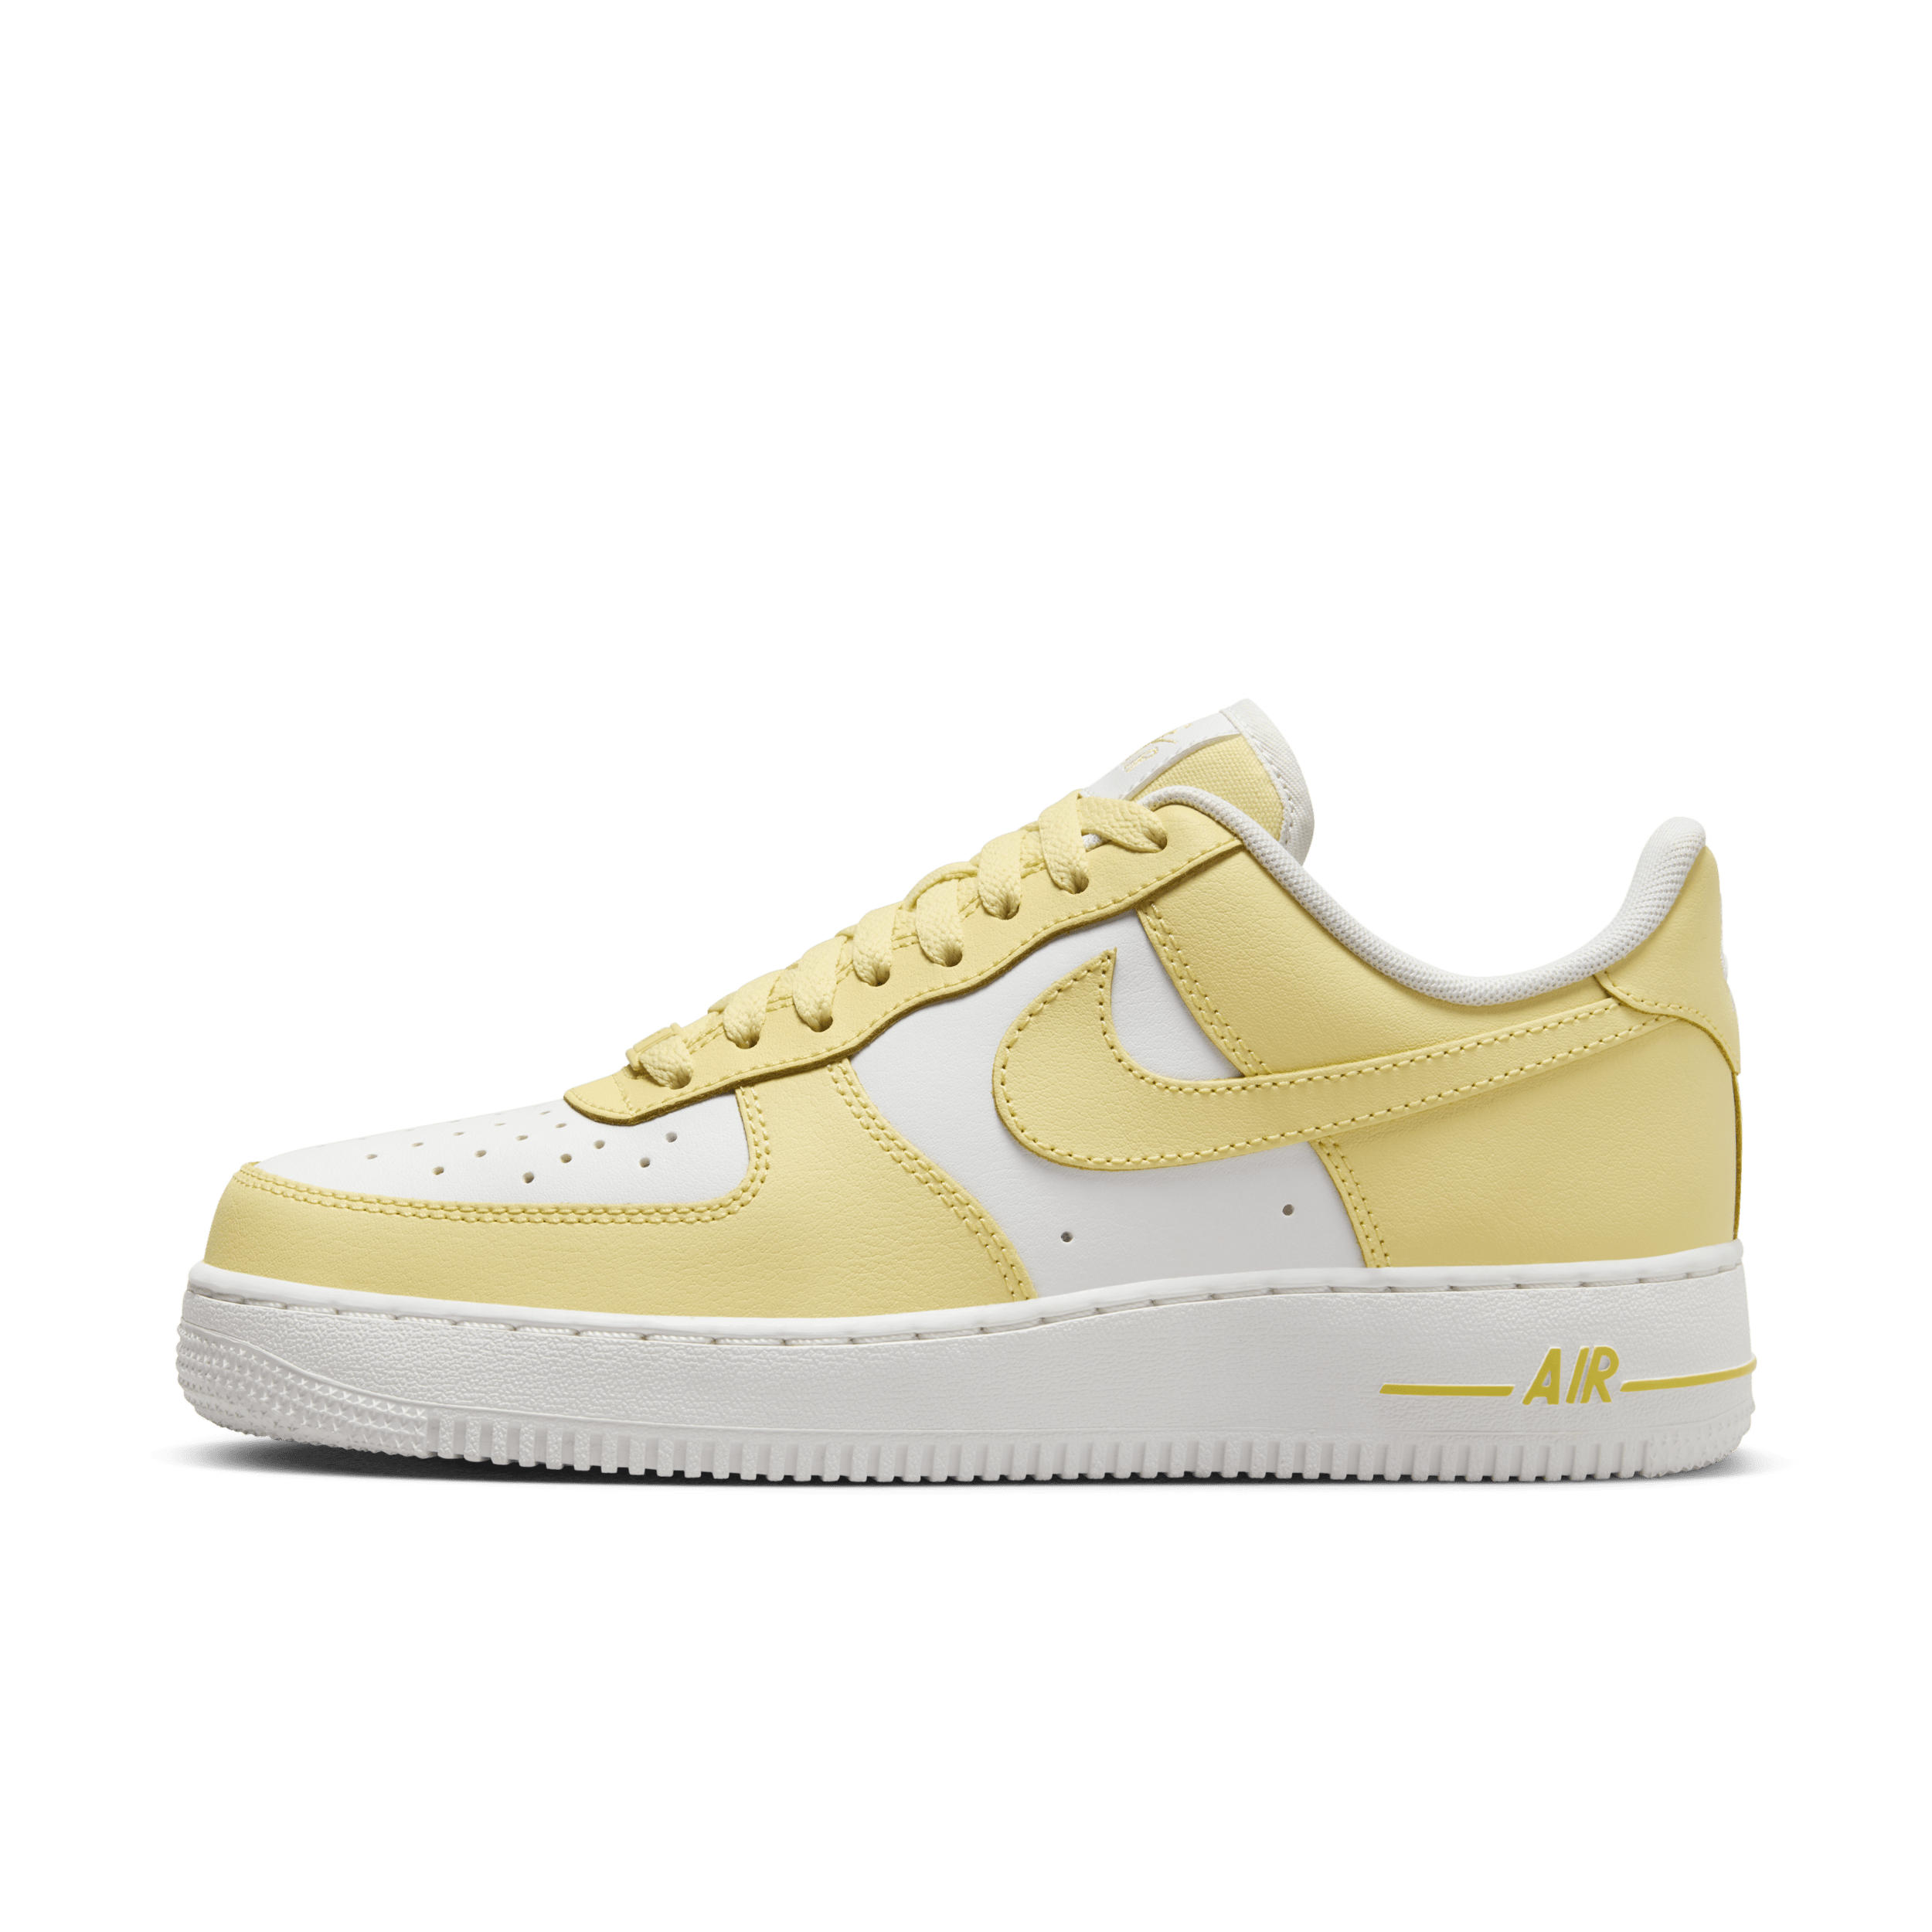 Scarpa Nike Air Force 1 '07 – Donna - Giallo